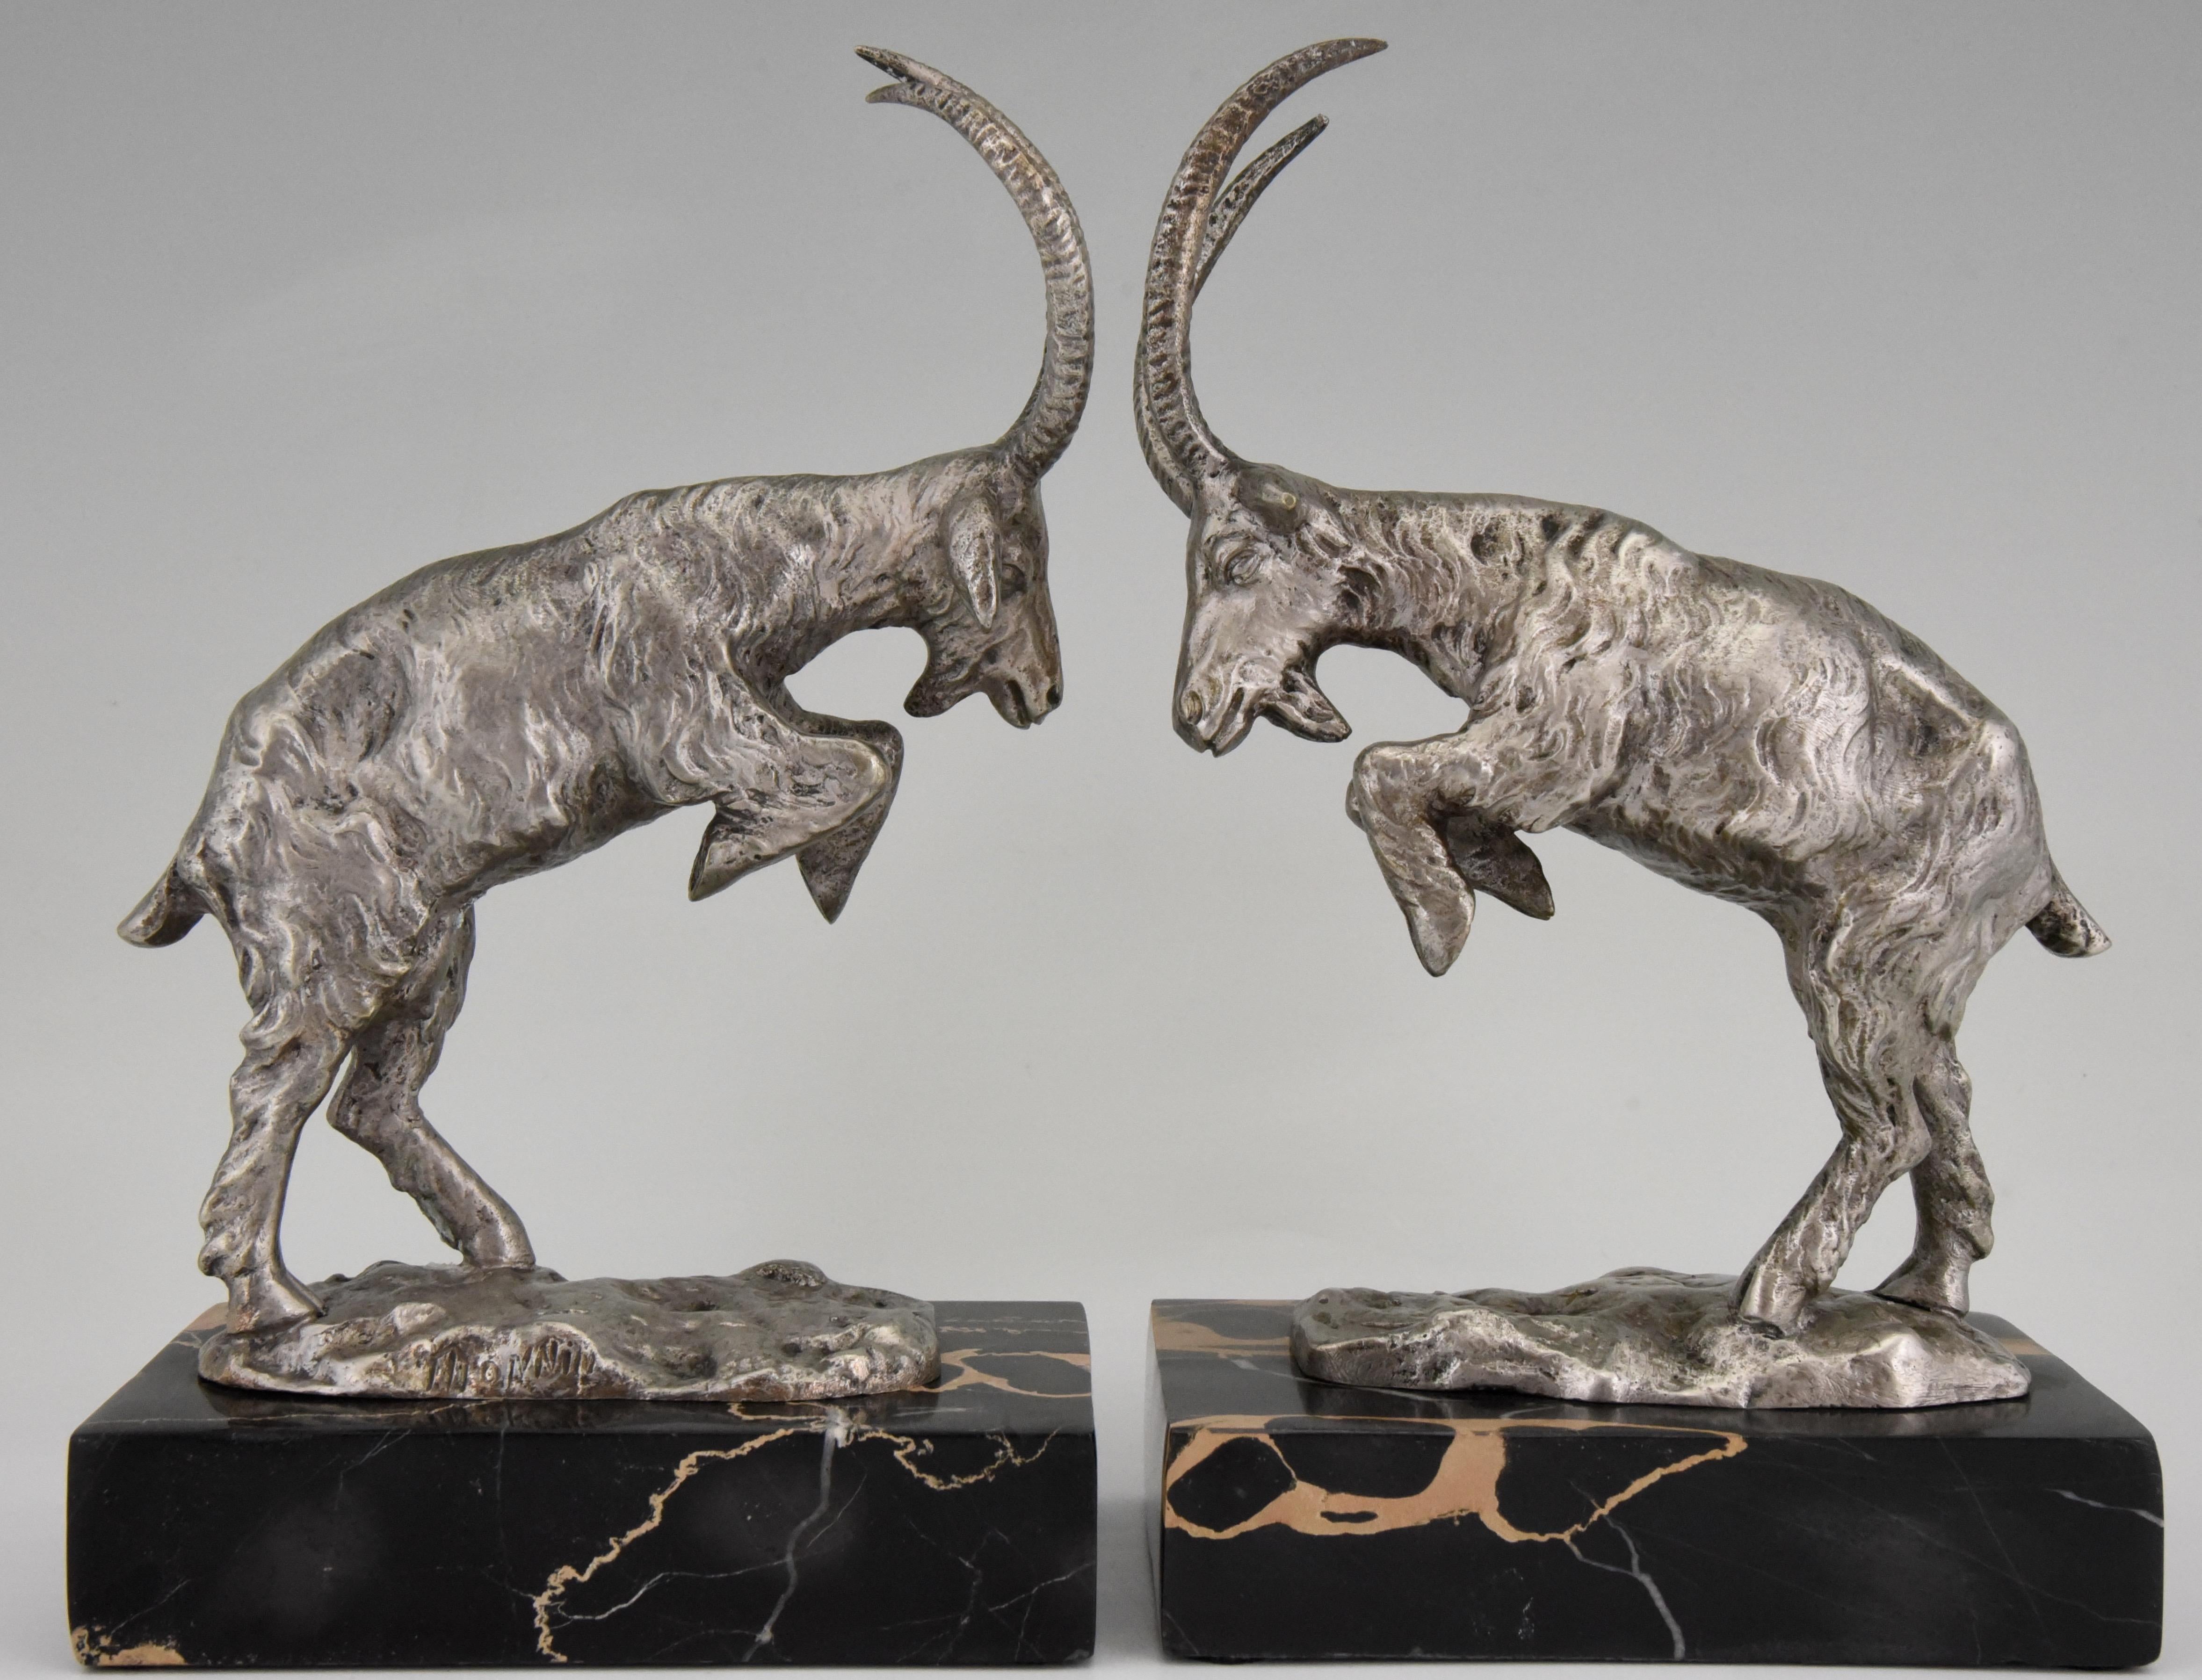 Nice pair of silvered bronze bookends with two long horned Billy goats, male goats. Signed by the French artist Monnin. The sculptures stand on Portor marble bases, circa 1925.